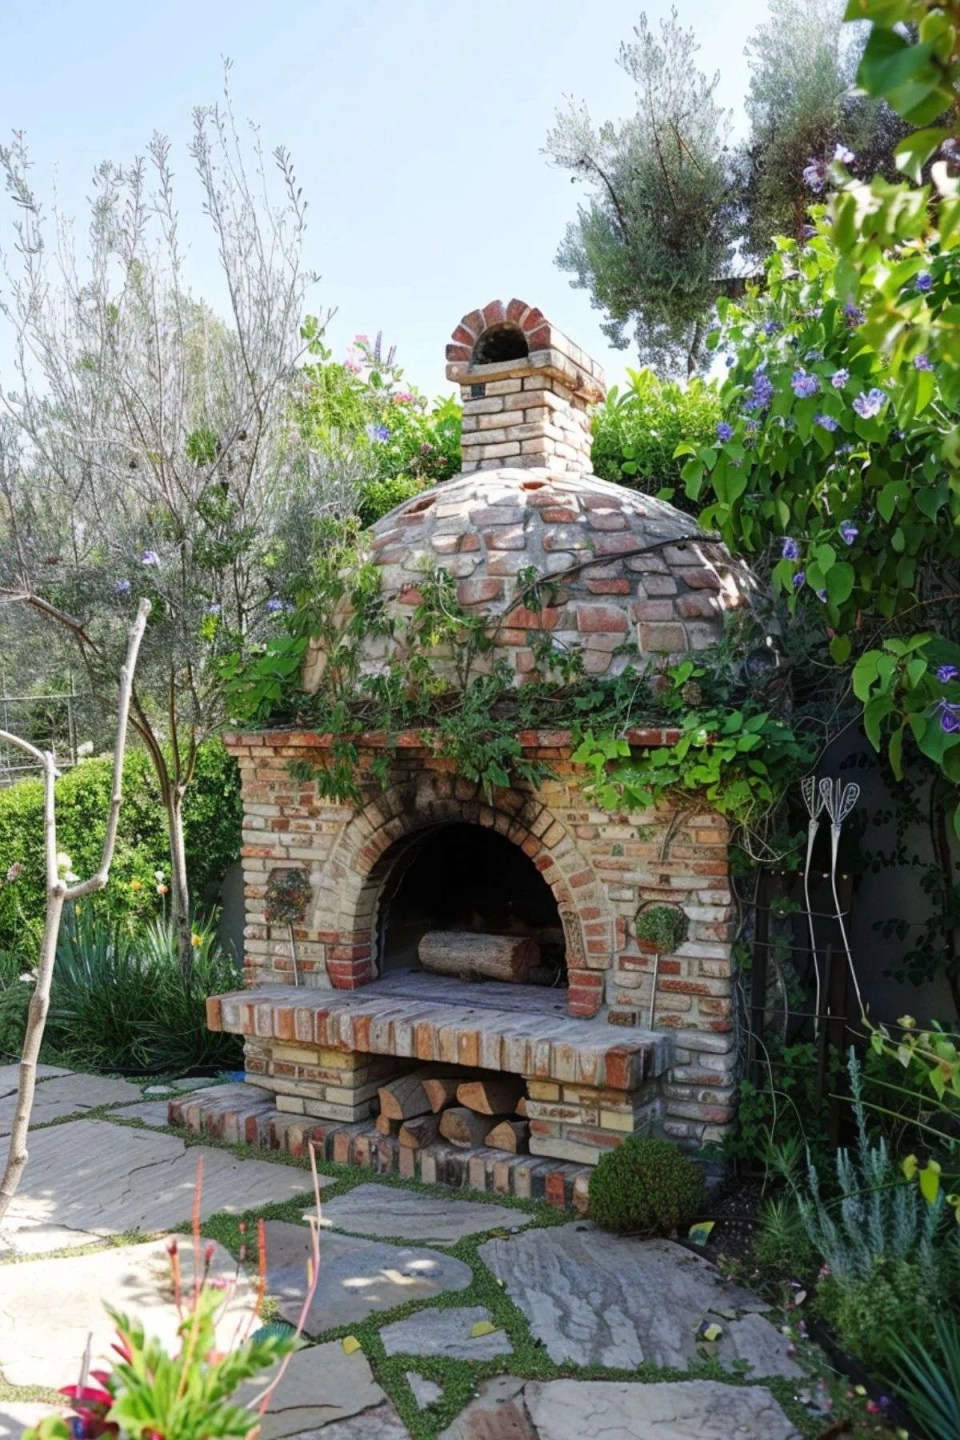 a pizza oven built out of bricks with flowers and shrubbery growing around it